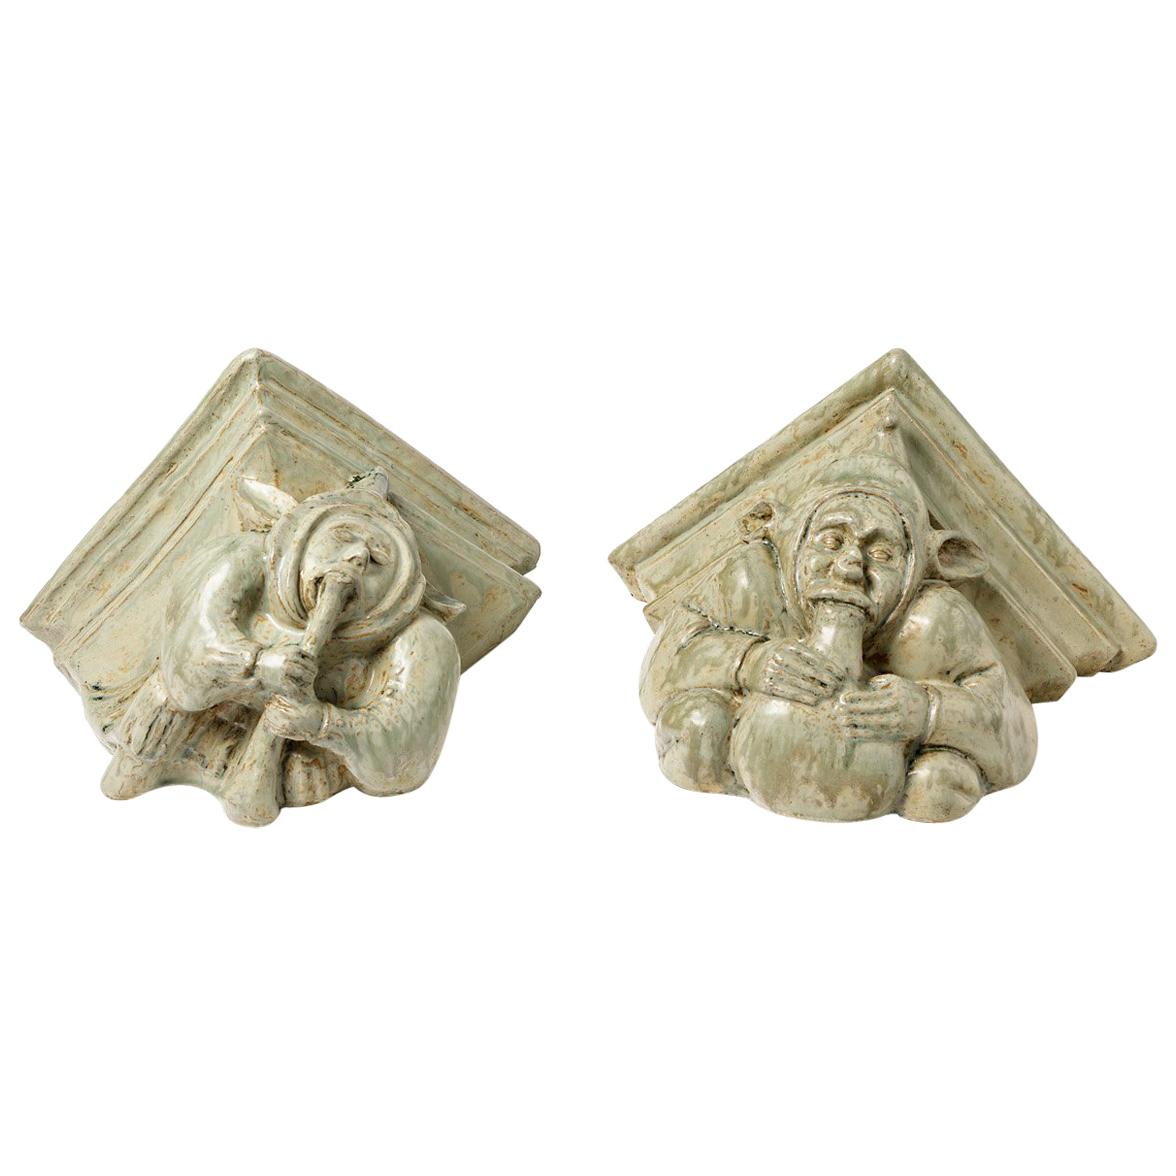 Rare Pair of Decorative Wall- Mounted Ceramic by Alfred Renoleau, circa 1900